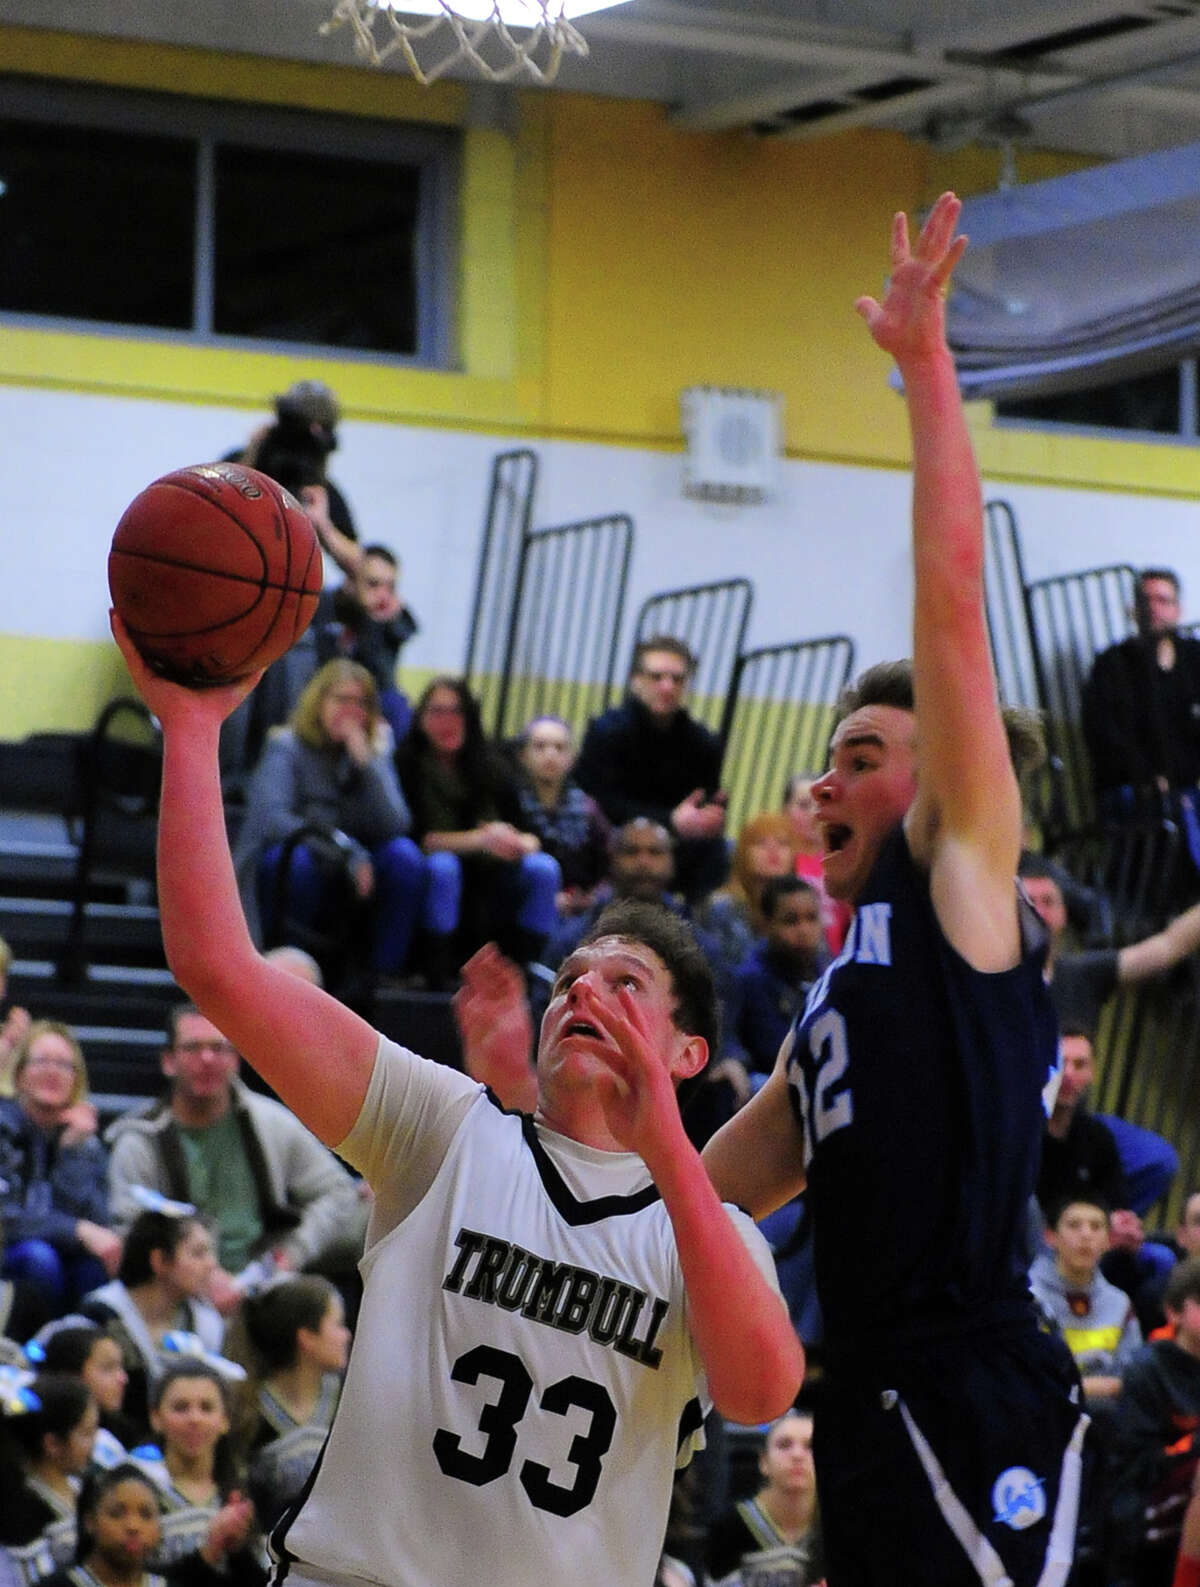 Trumbull's Ben McCullough looks for two under the hoop as Wilton's Matt Shifrin defends, during basketball action in Trumbull, Conn., on Friday Jan. 9, 2015.